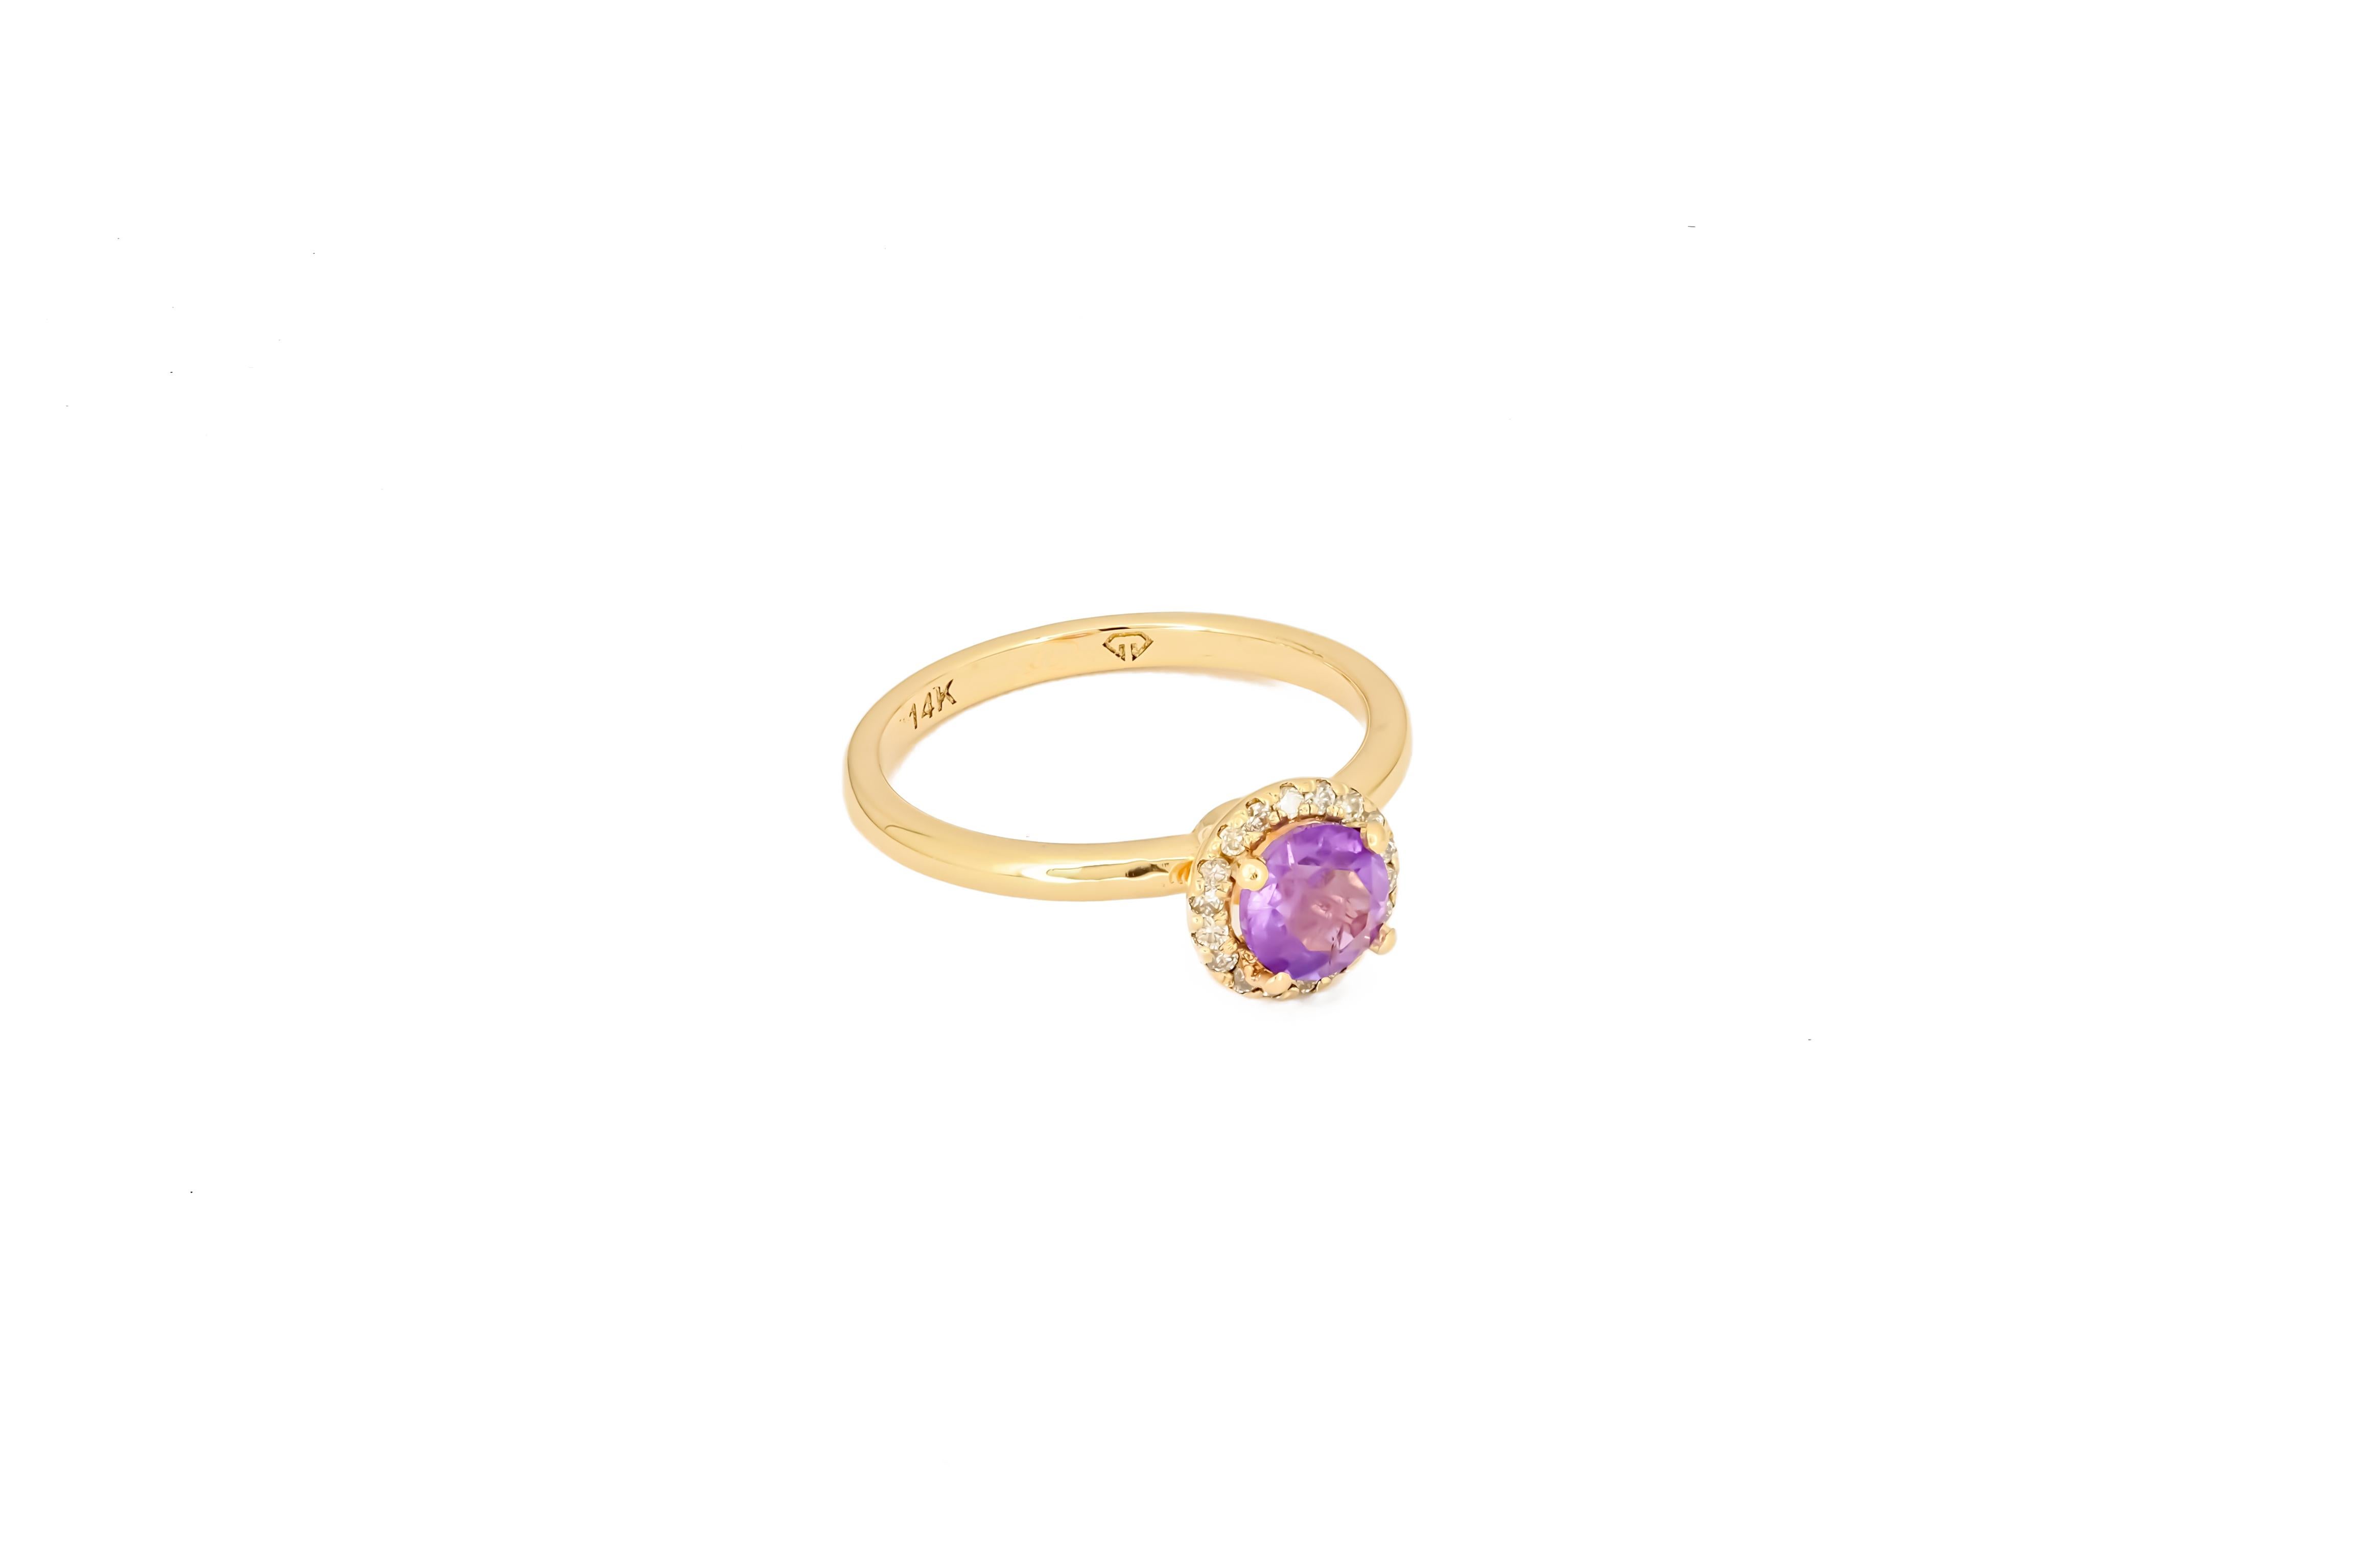 For Sale:  Halo Amethyst Ring with Diamonds in 14 Karat Gold, Amethyst Gold Ring 8